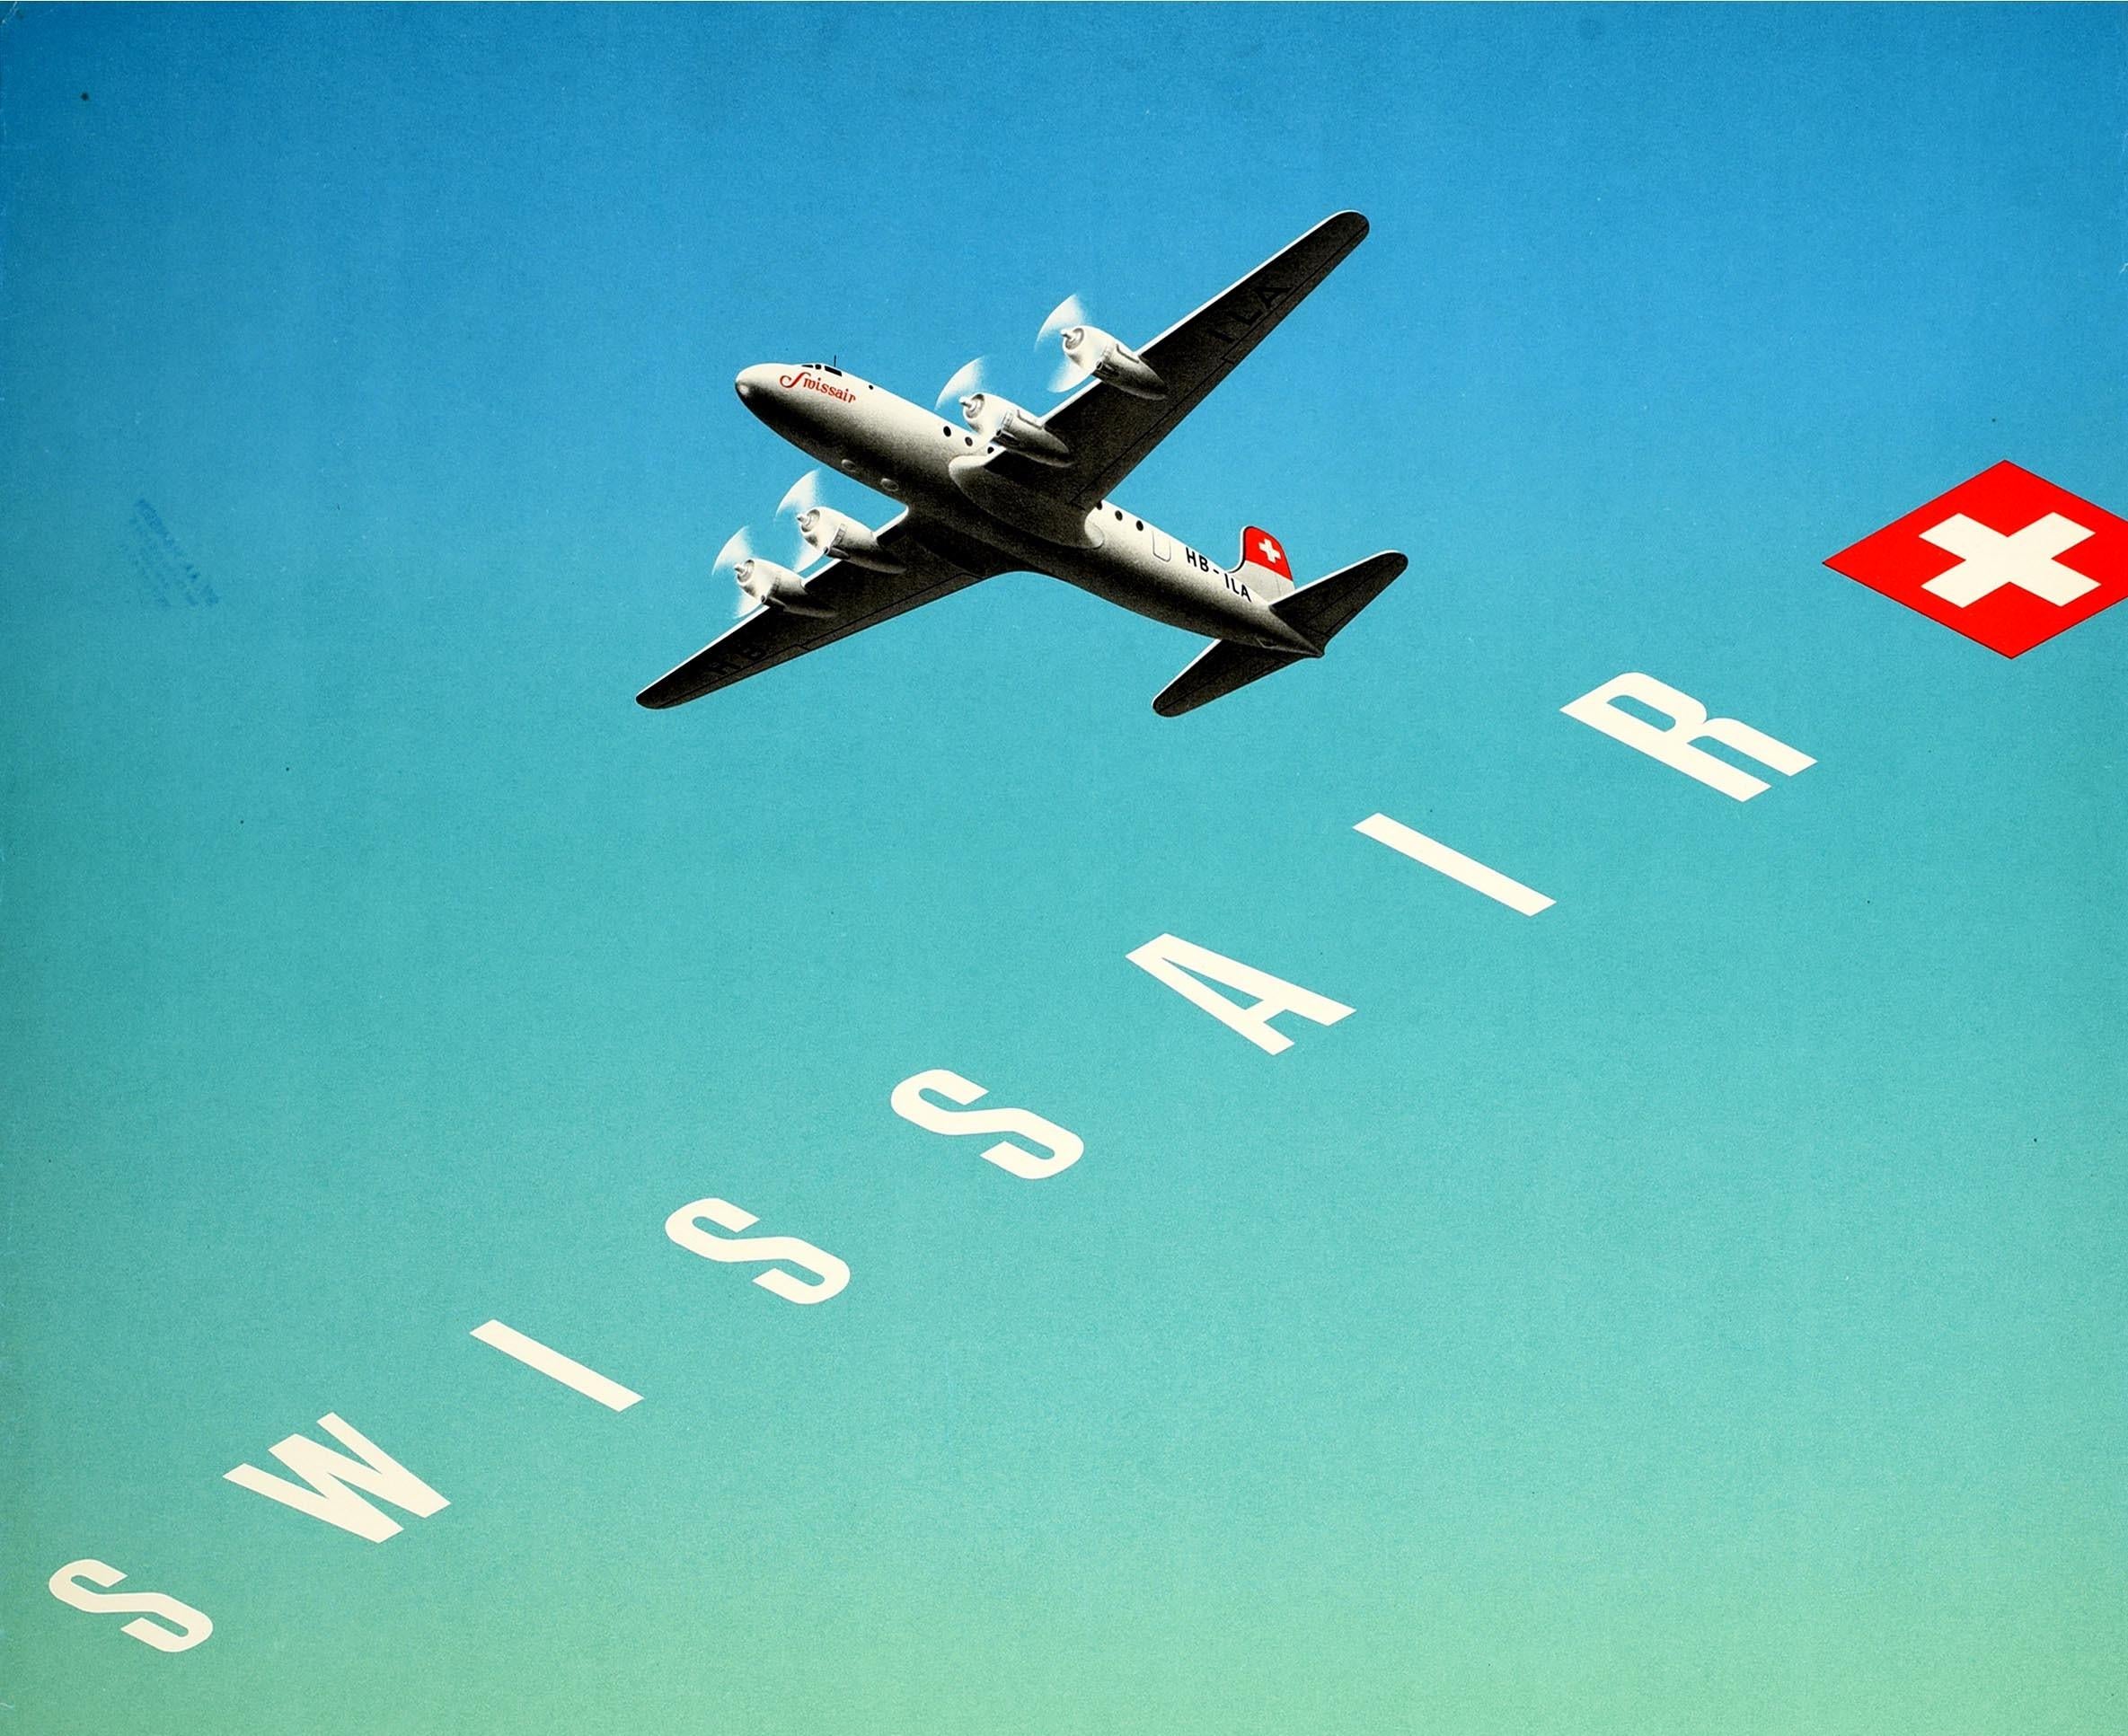 Original vintage travel advertising poster for Swissair featuring a fantastic illustration of a propeller plane flying high over the Swiss Alps with a red and white cross Swiss flag and the title text in bold white lettering running diagonally below